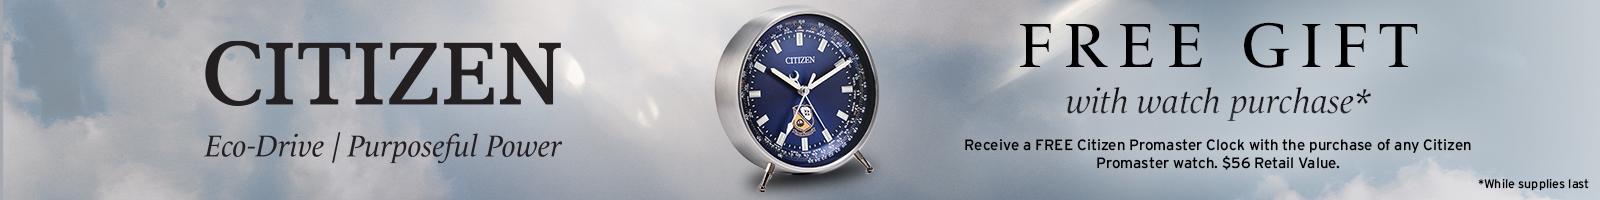 Receive a free Citizen promaster clock with purchase of any Citizen promaster air watch.